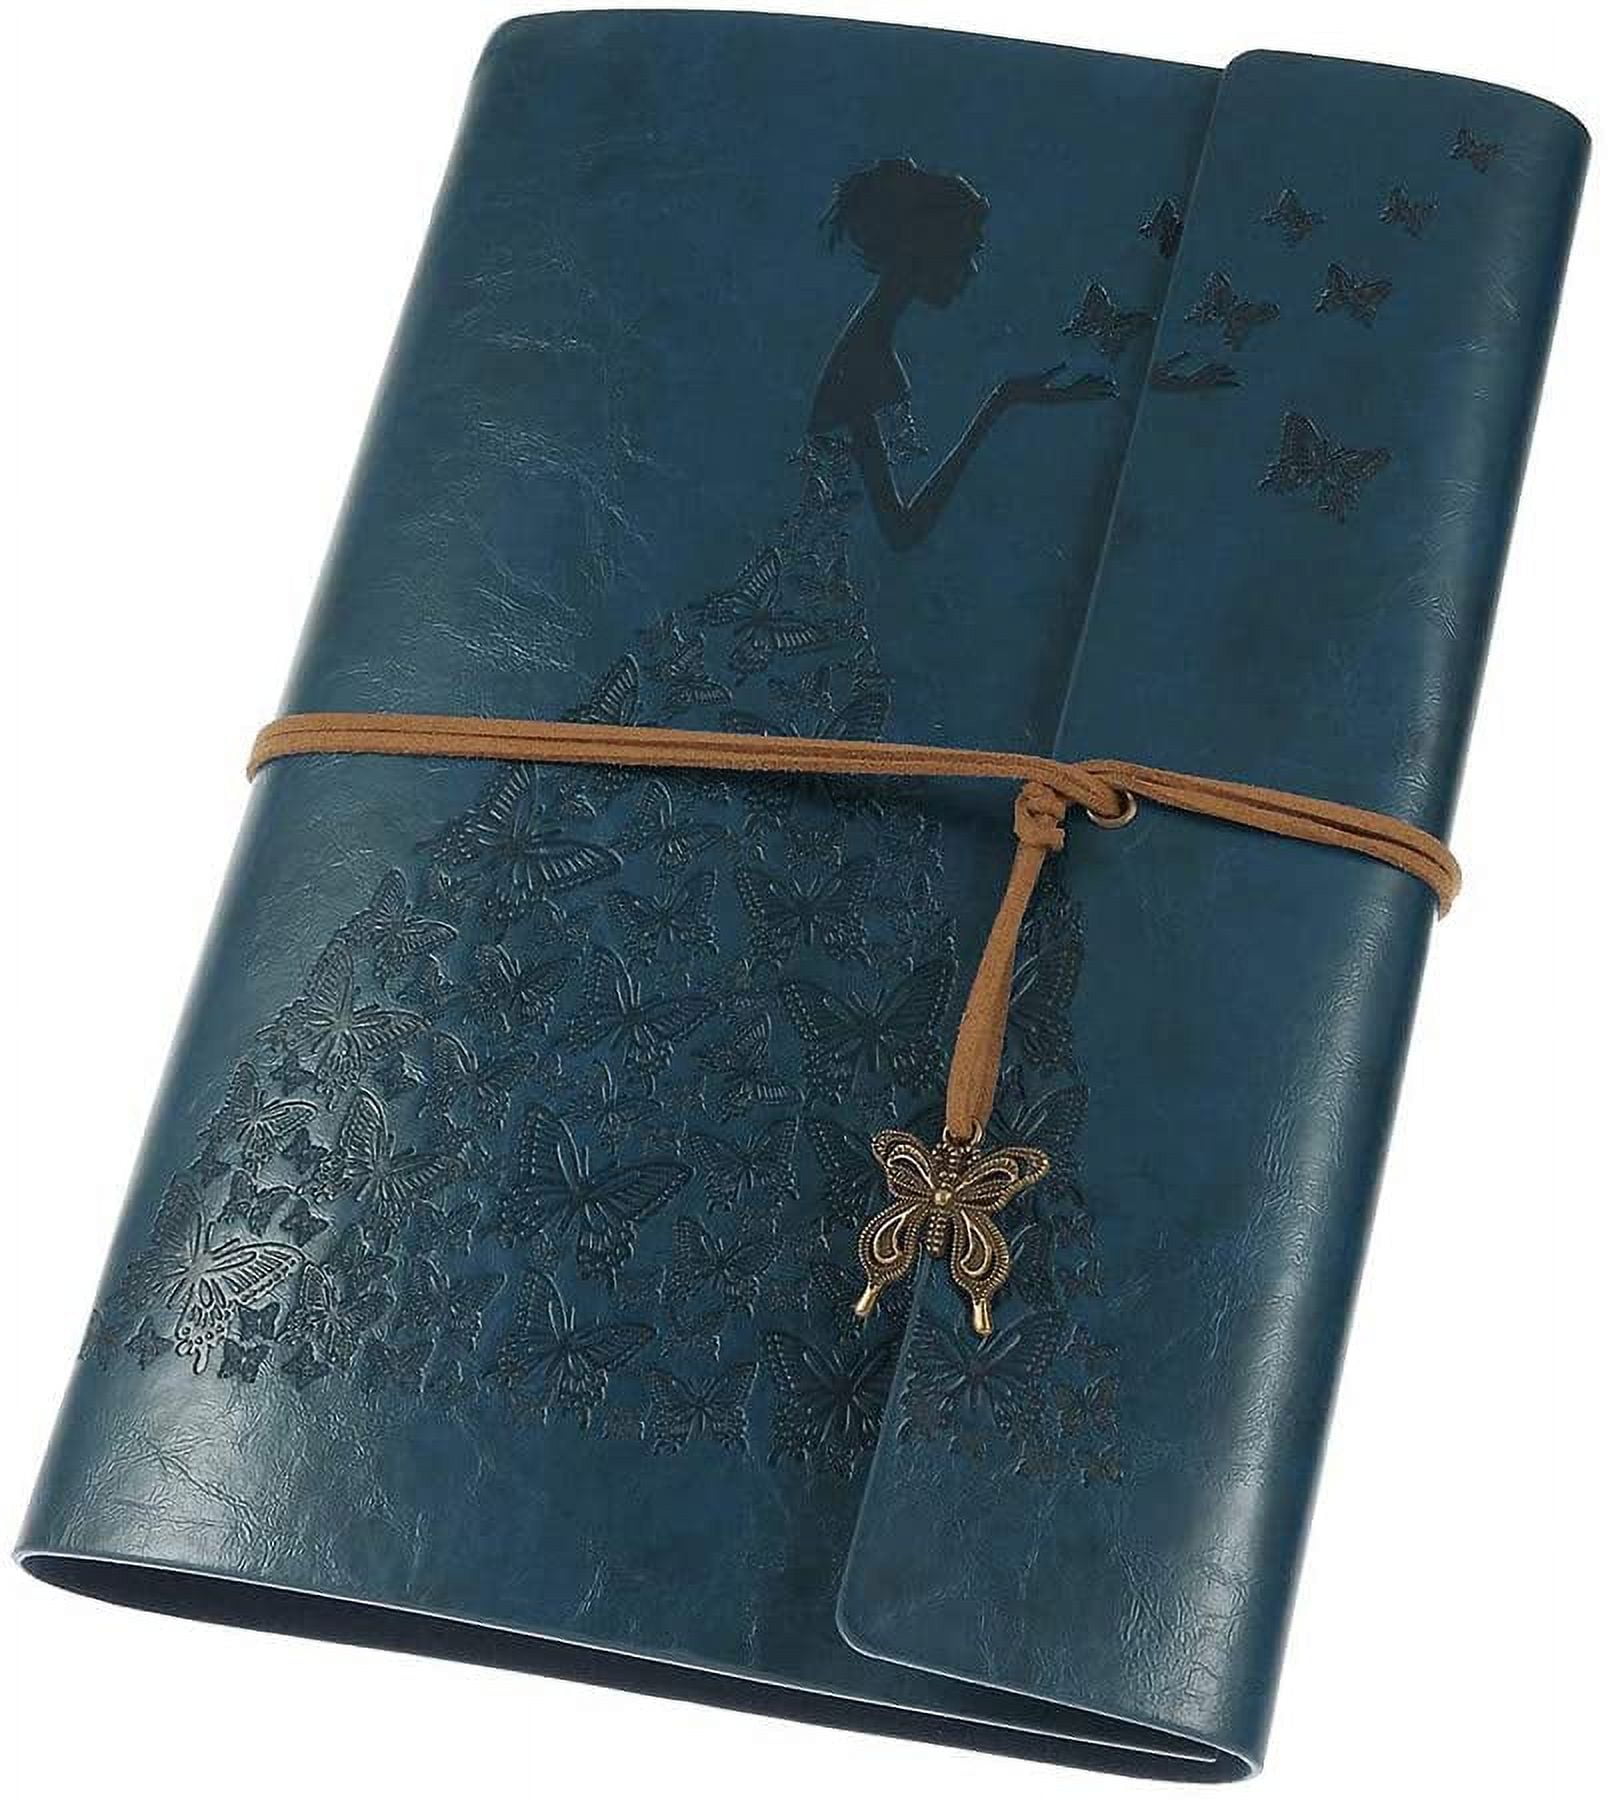 400 Sheets Genuine Leather Notebook Diary Notepad Vintage Thick Sketchbook  Notepad Creative Stationery Traveler Journal Gifts